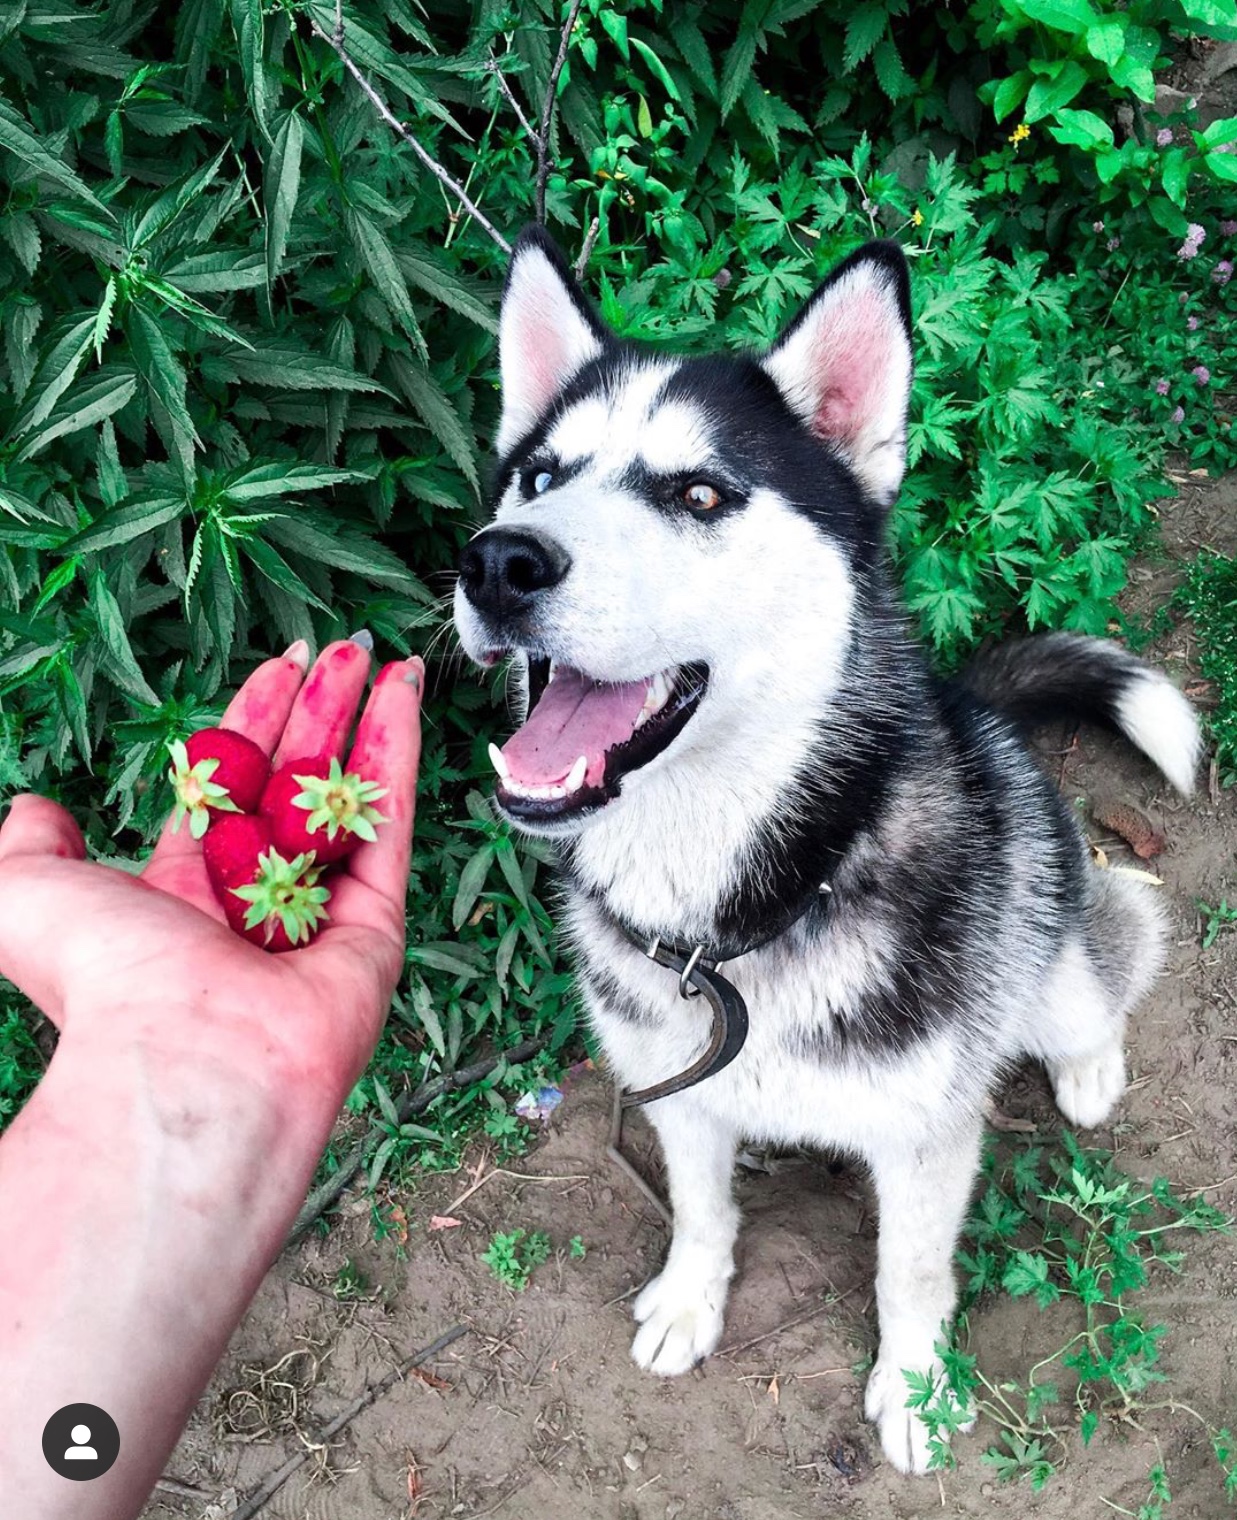 A Husky sitting on the ground while staring at the strawberry in the hand of woman